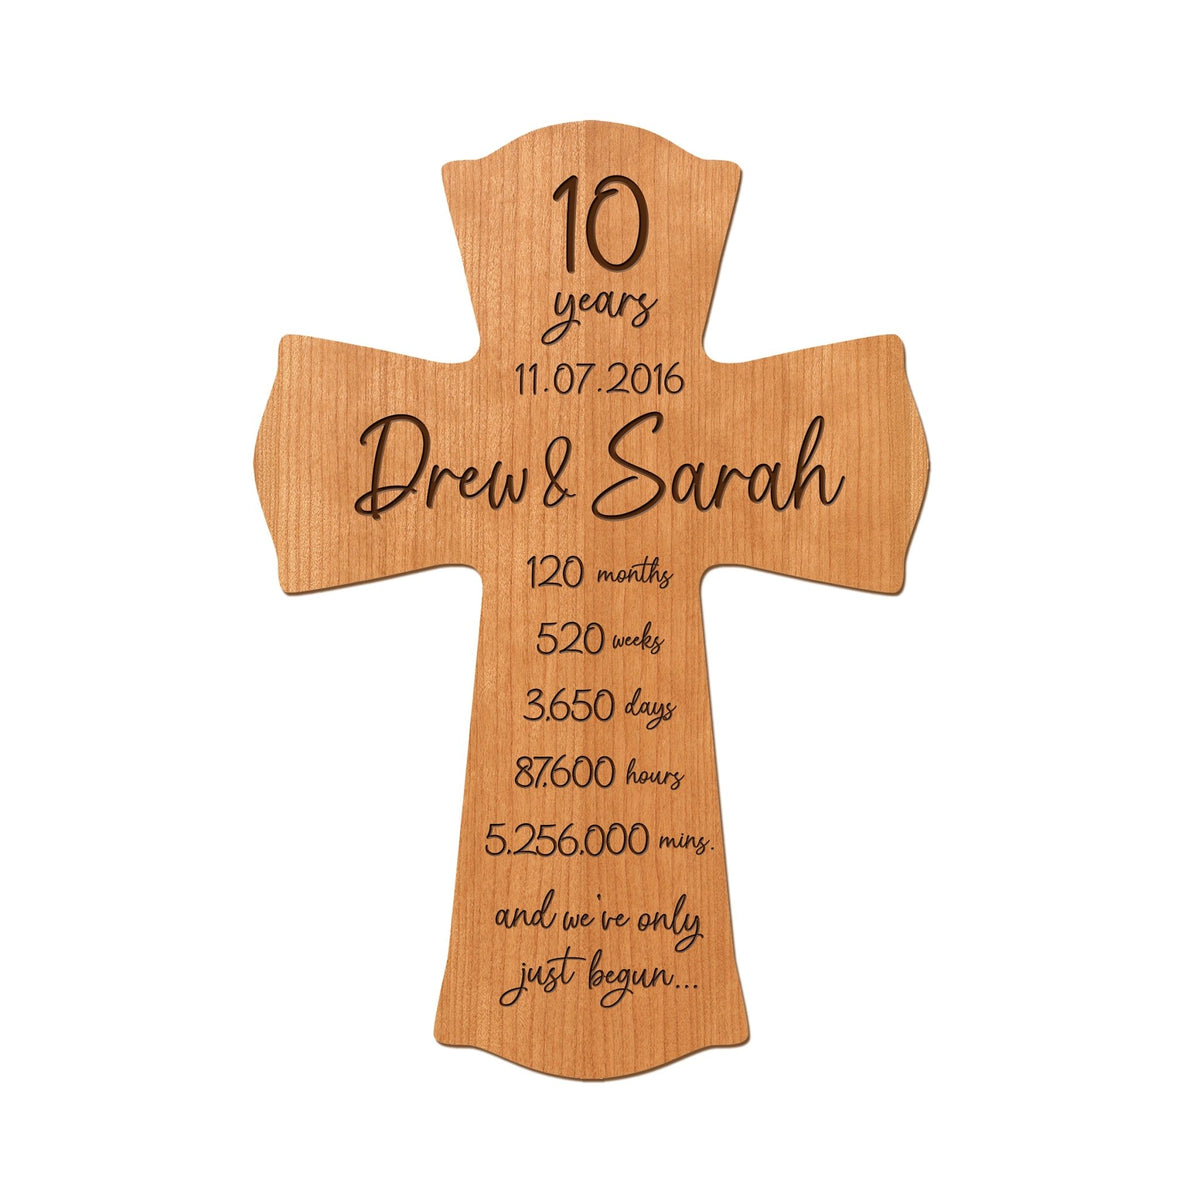 Lifesong Milestones Elegant Personalized Wall Cross – Ideal 10th Anniversary Gift for Couple